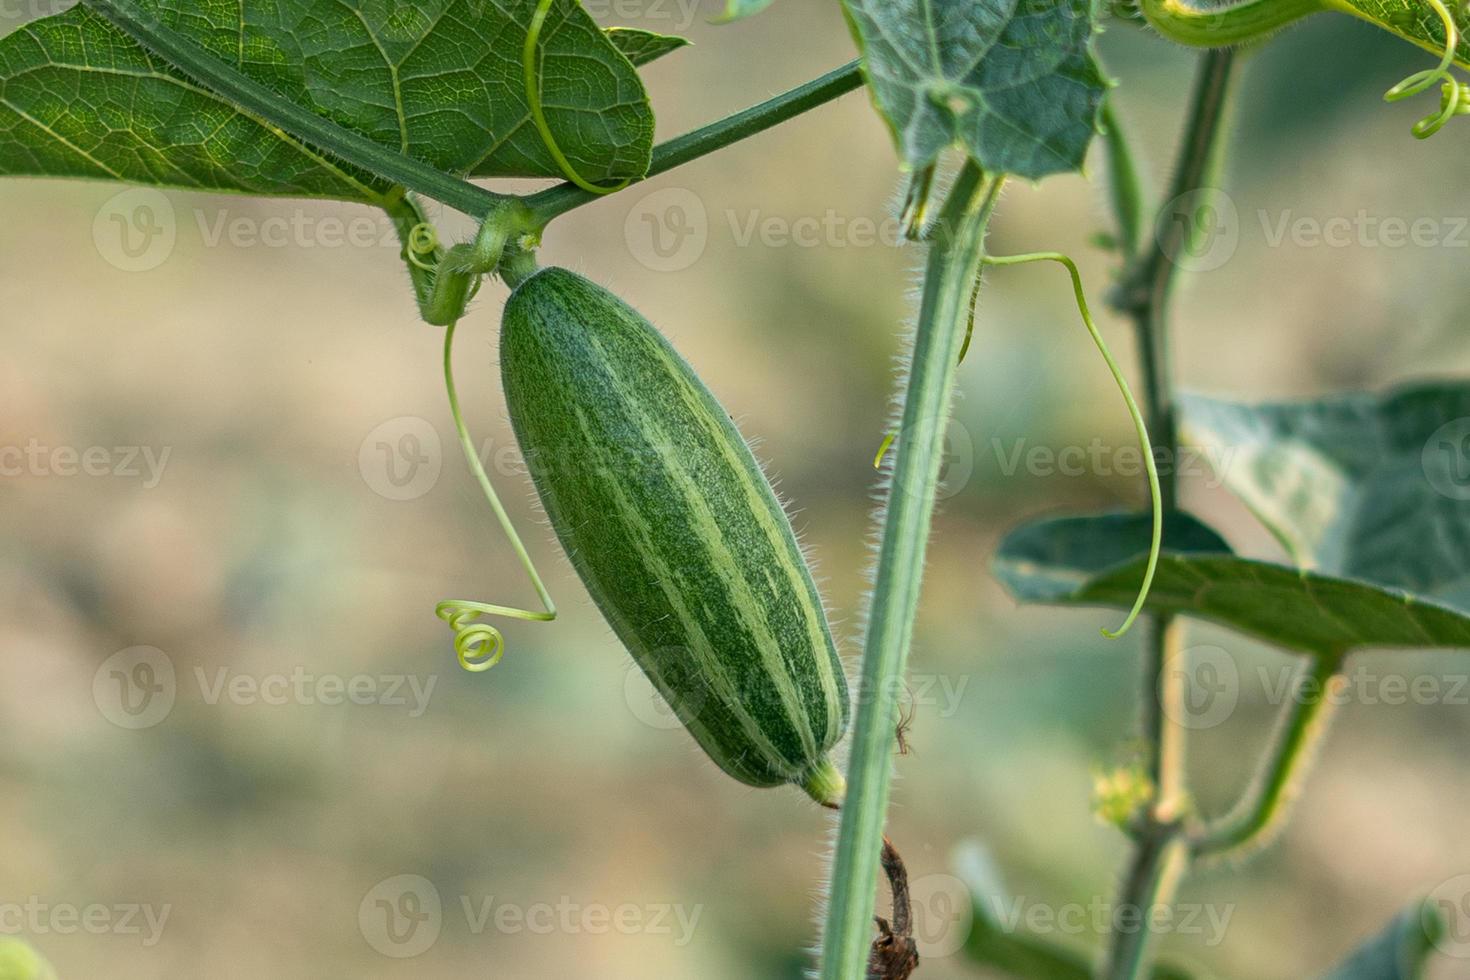 Close up of green pointed gourd in vegetable garden photo